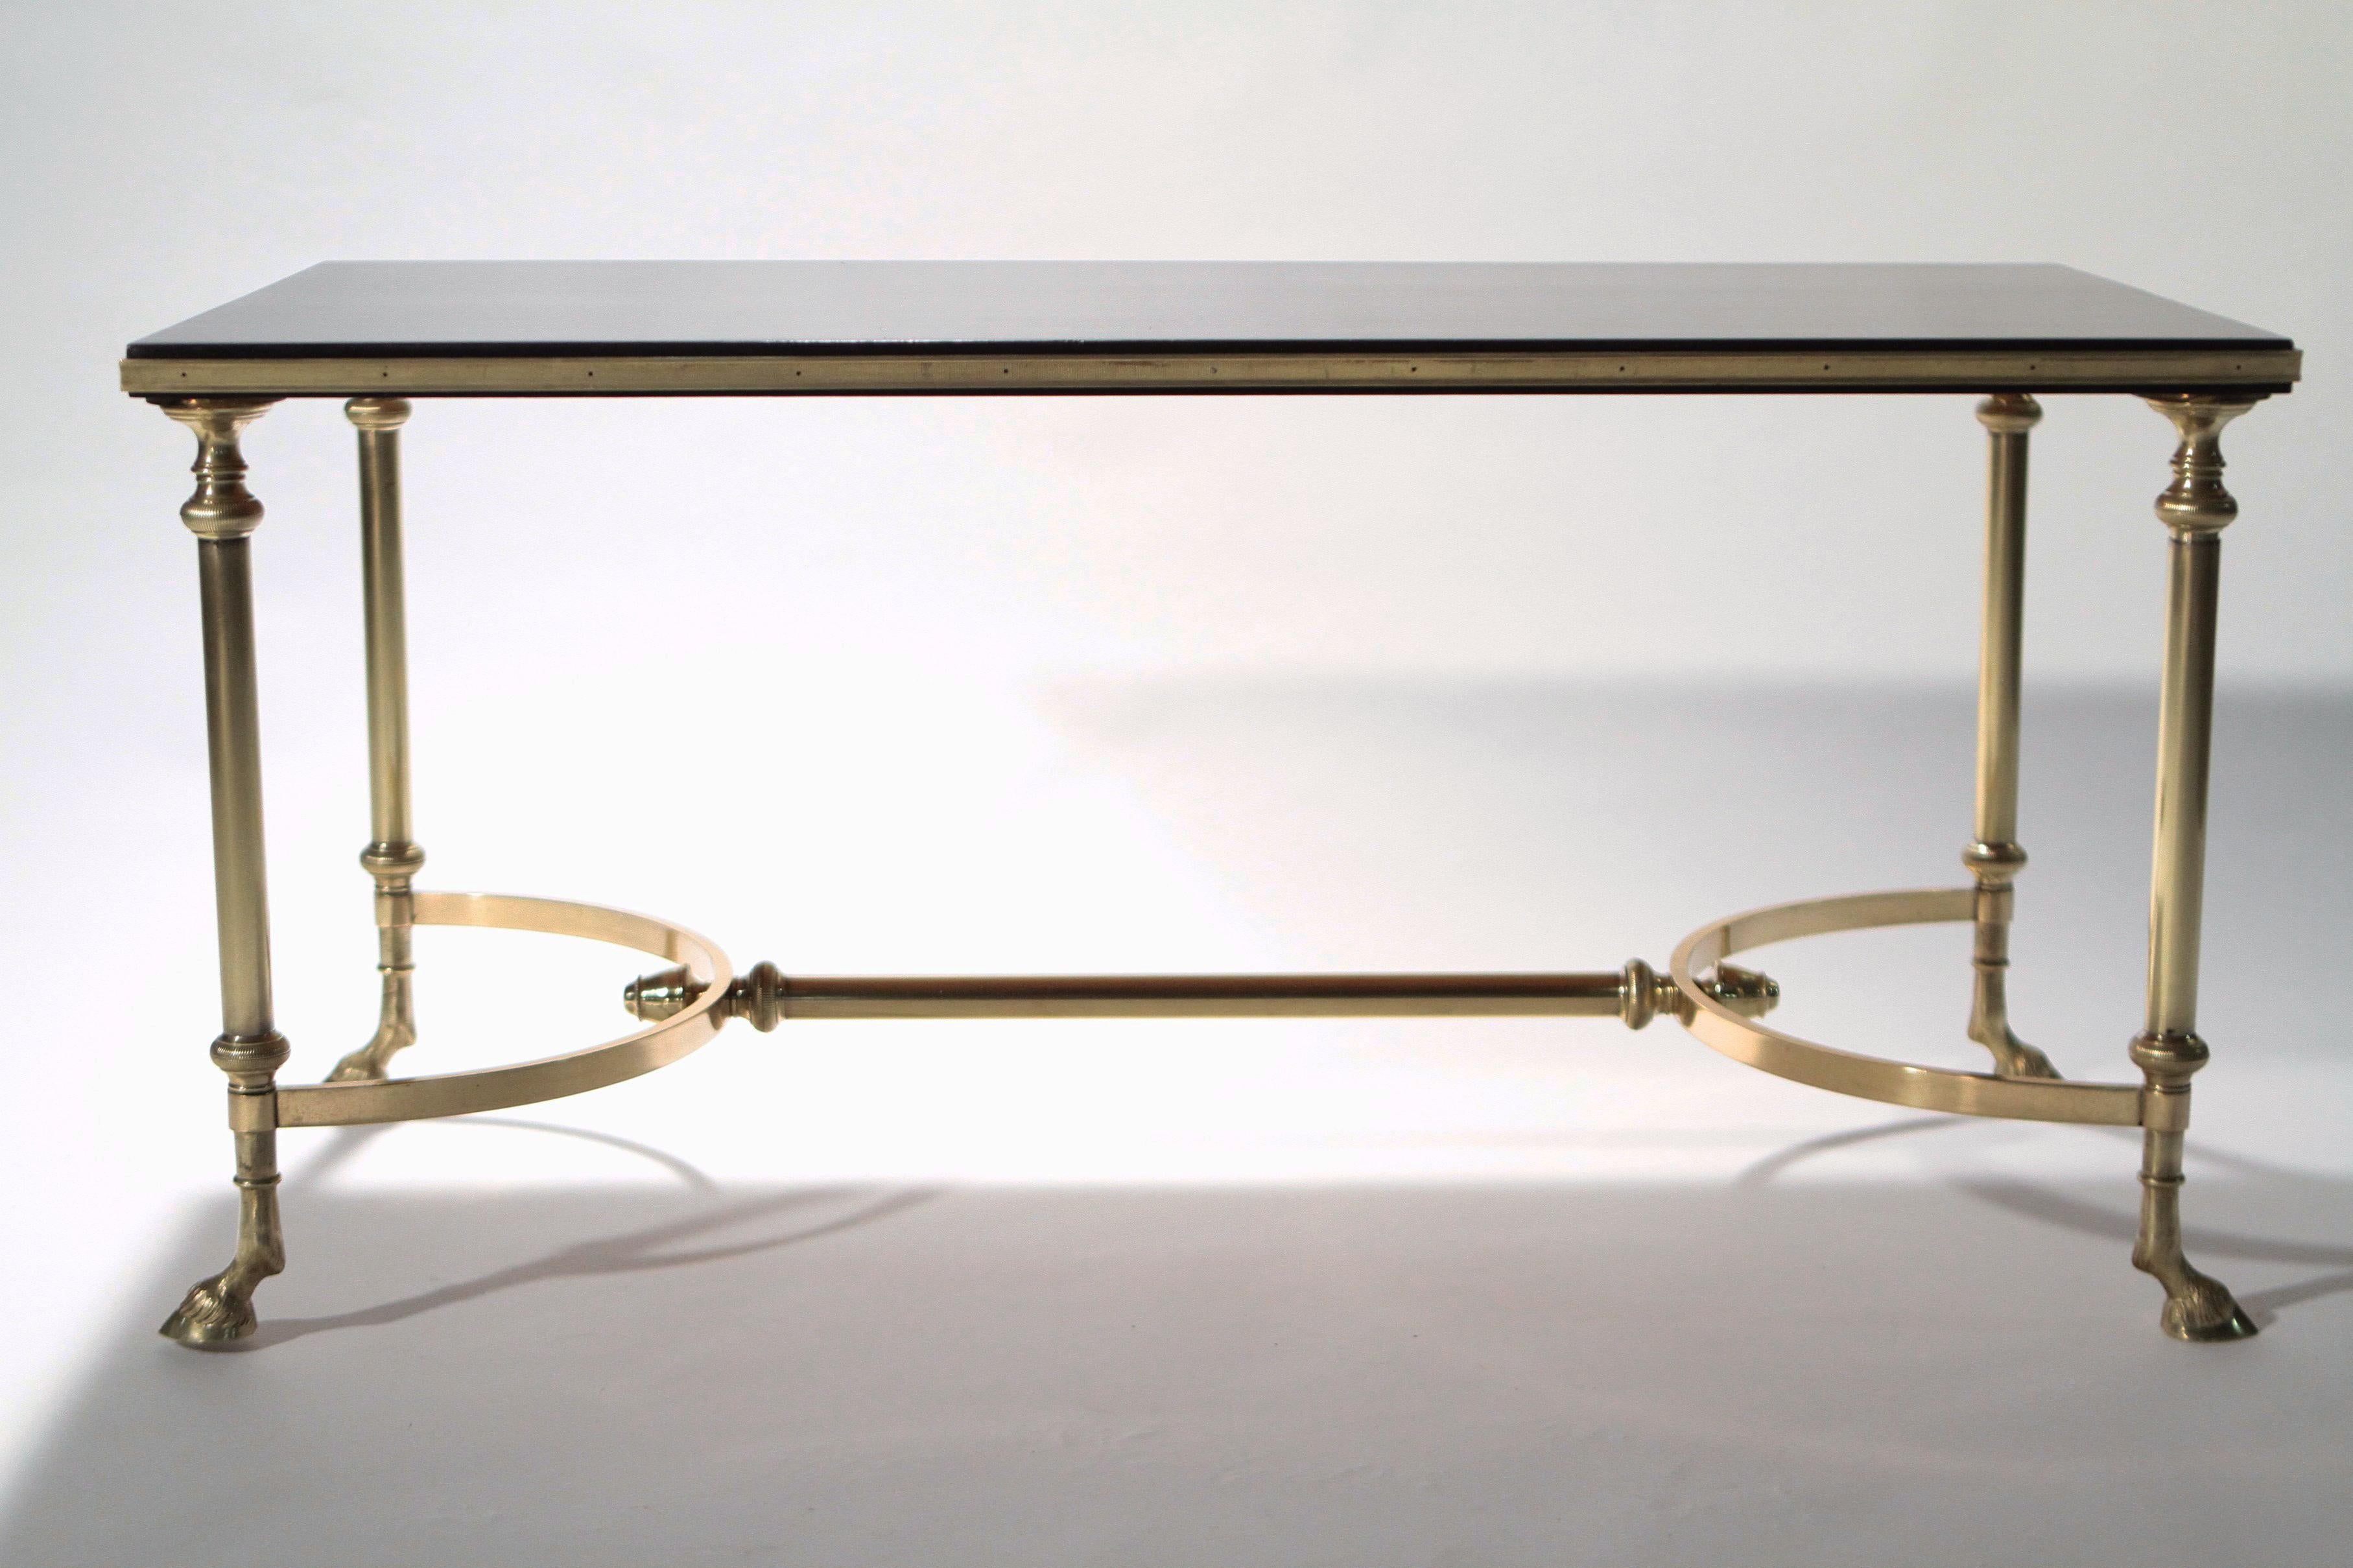 This piece surprises with each closer look. An imaginative coffee table with brilliant brass feet and a black lacquer surface, the beautiful details are what makes the table distinct, from well-crafted brass hoof feet, to the aesthetically pleasing